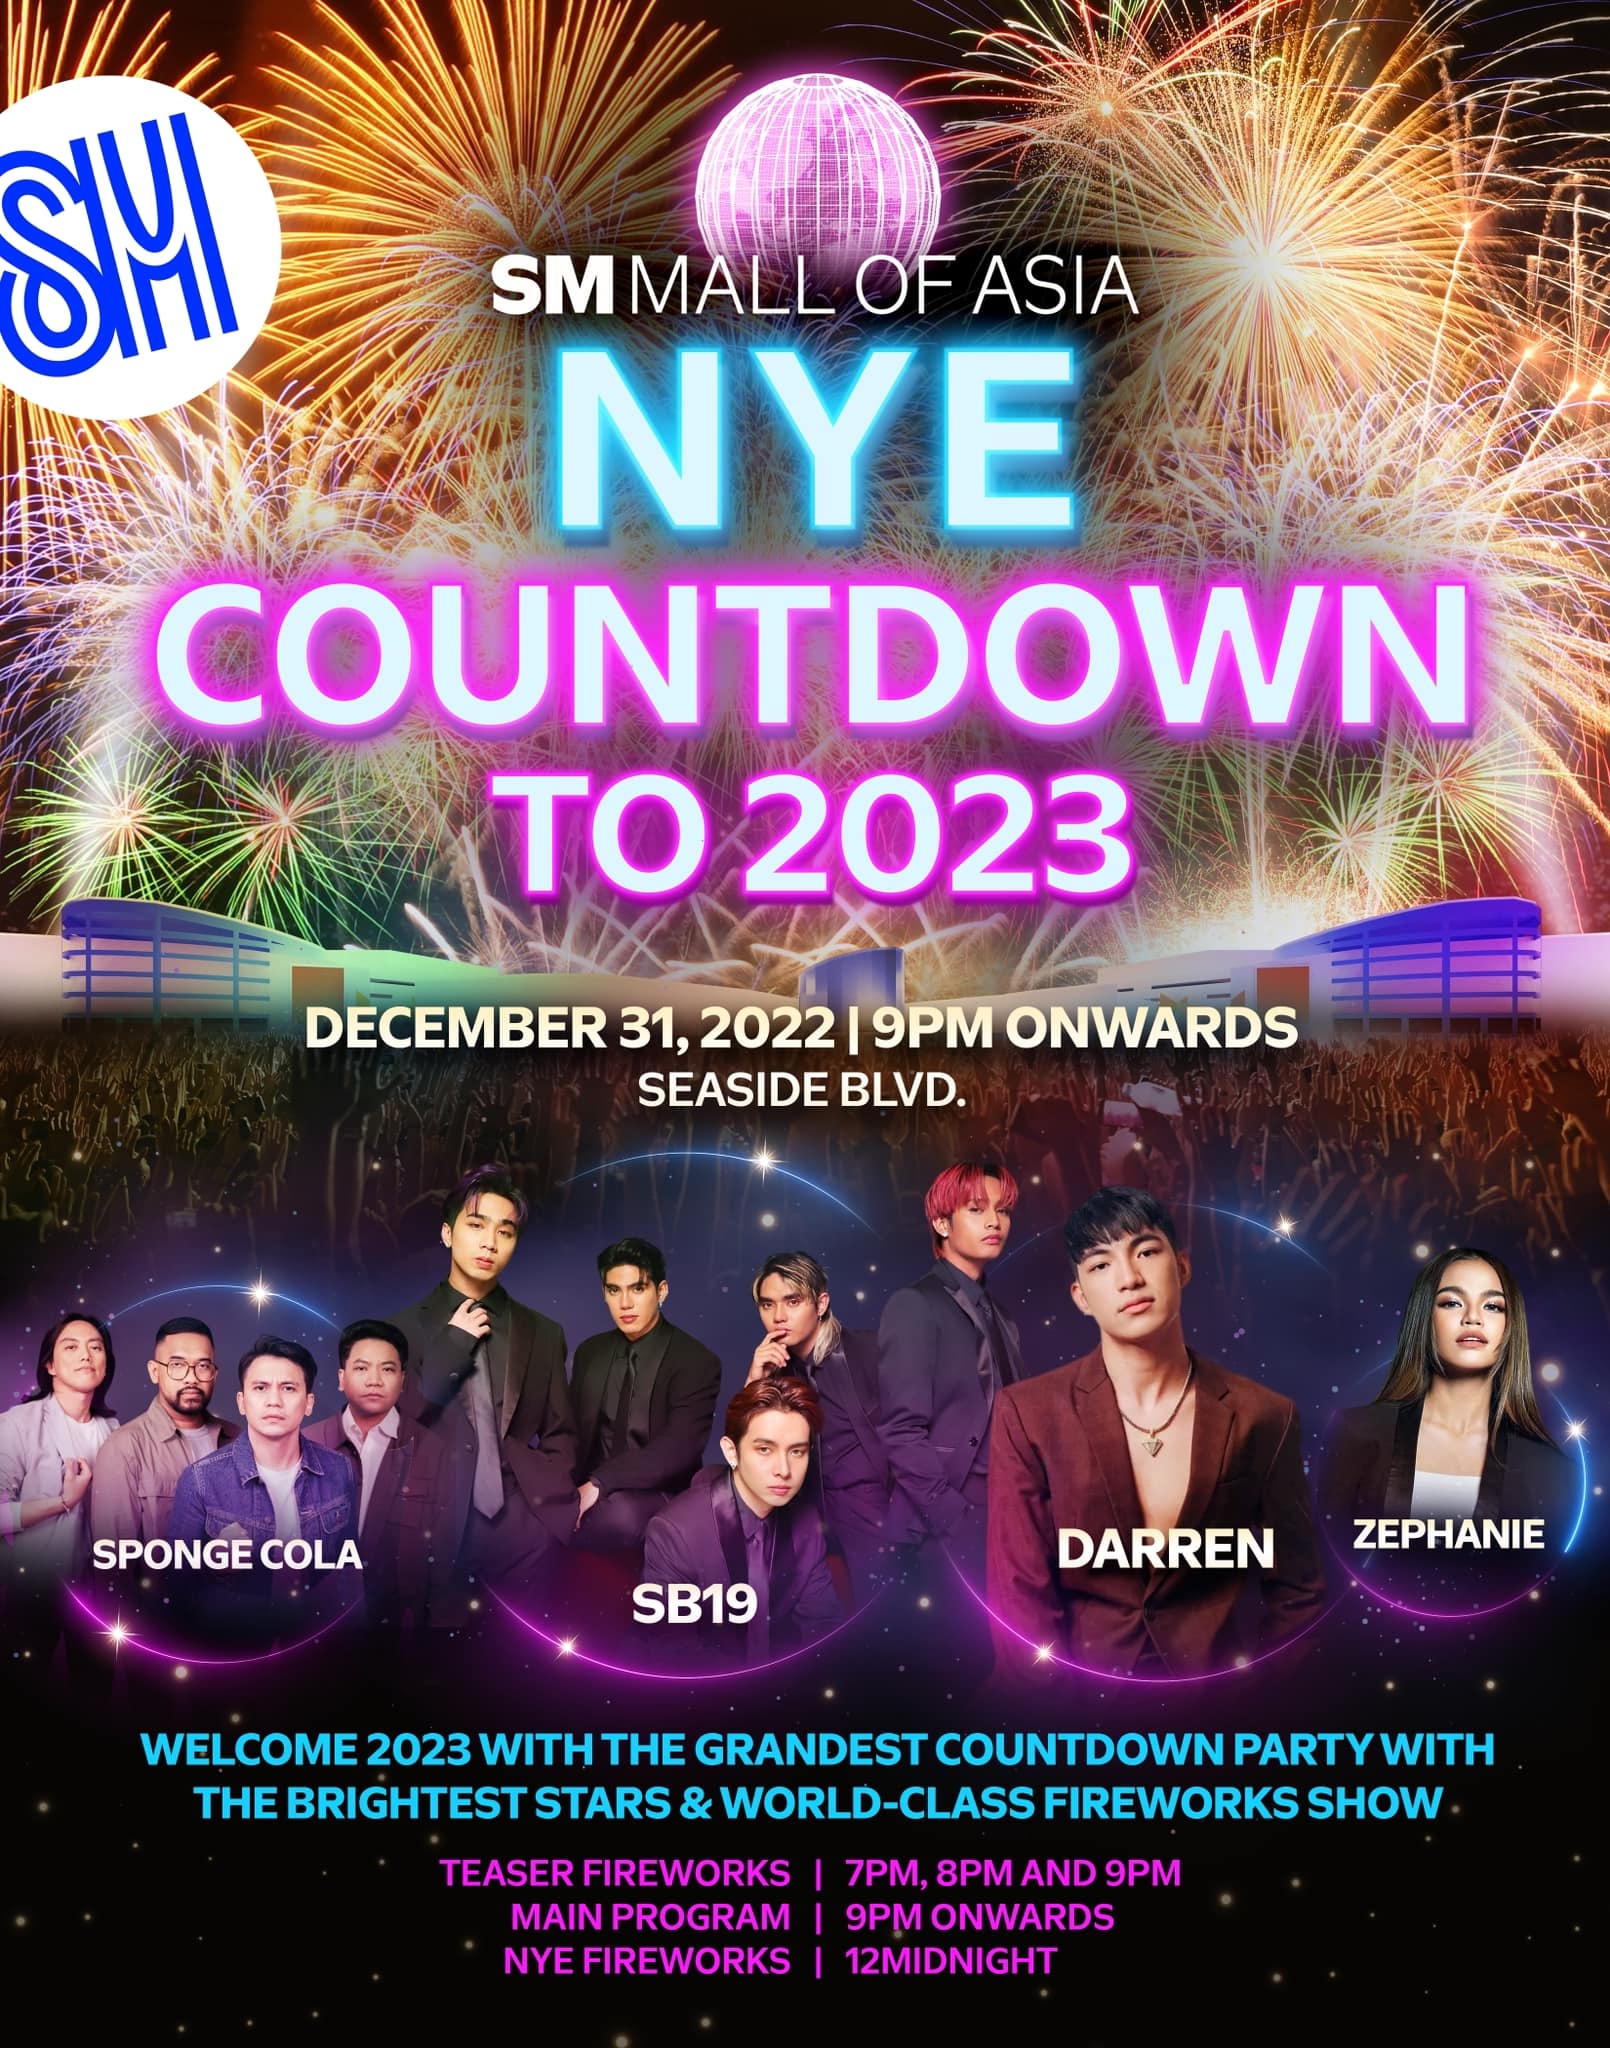 SM Mall of Asia New Year's Eve Countdown to 2023!